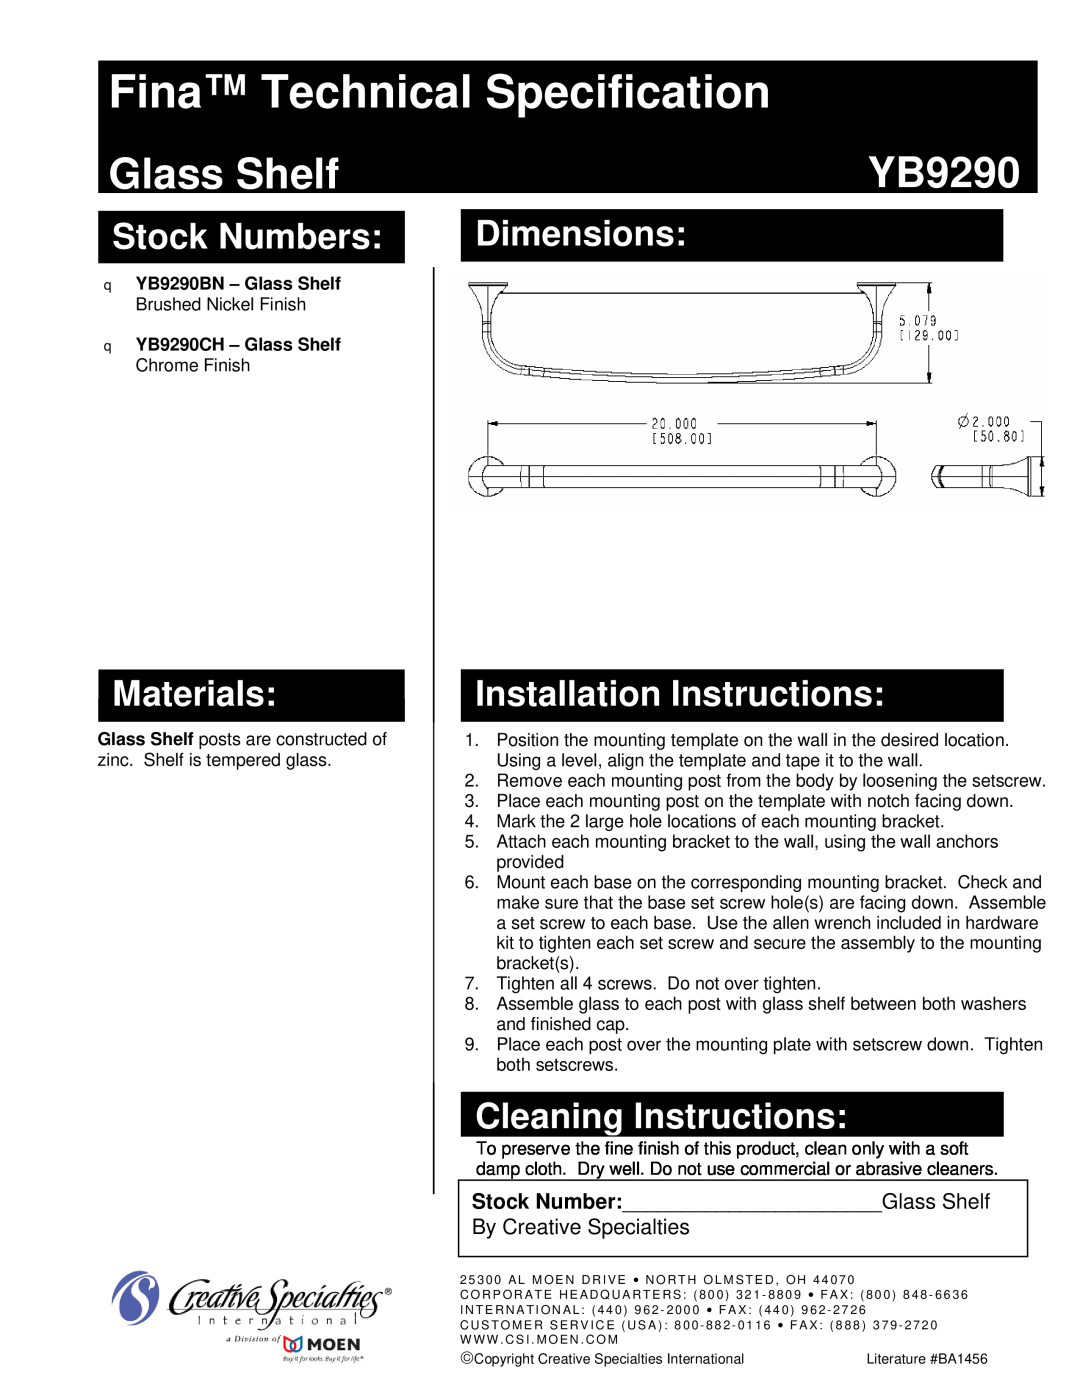 Univex YB9290 dimensions Fina Technical Specification, Glass Shelf, Stock Numbers, Materials, Cleaning Instructions 